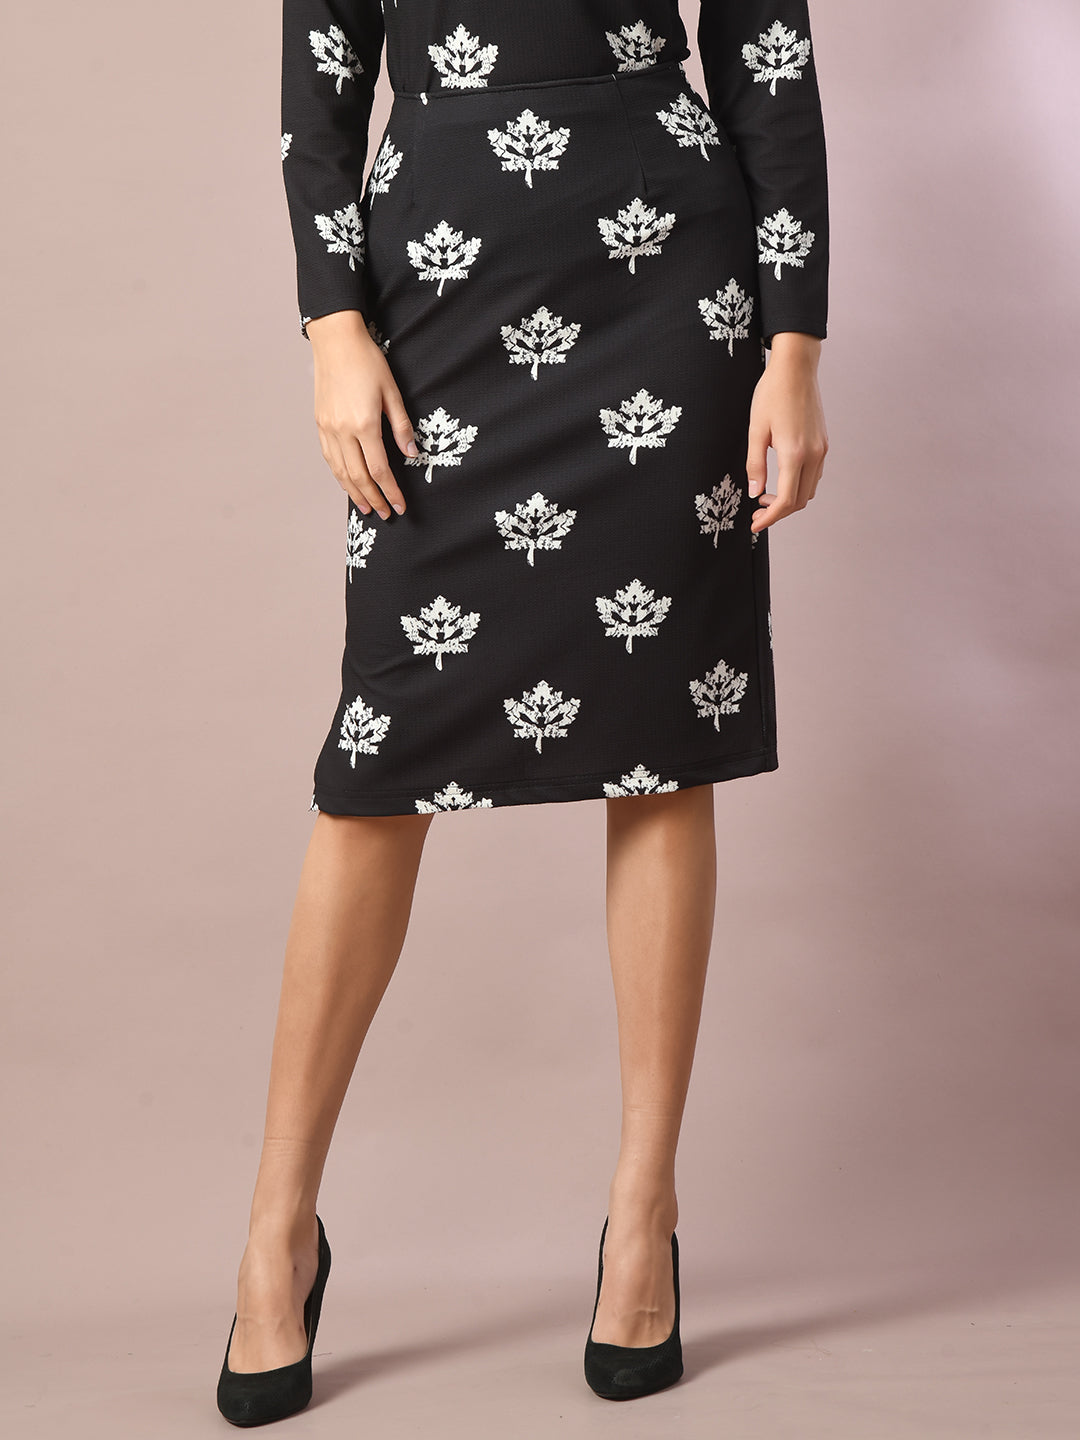 Women's  Black Printed Round Neck Party Top With Skirt Co-Ord Set  - Myshka